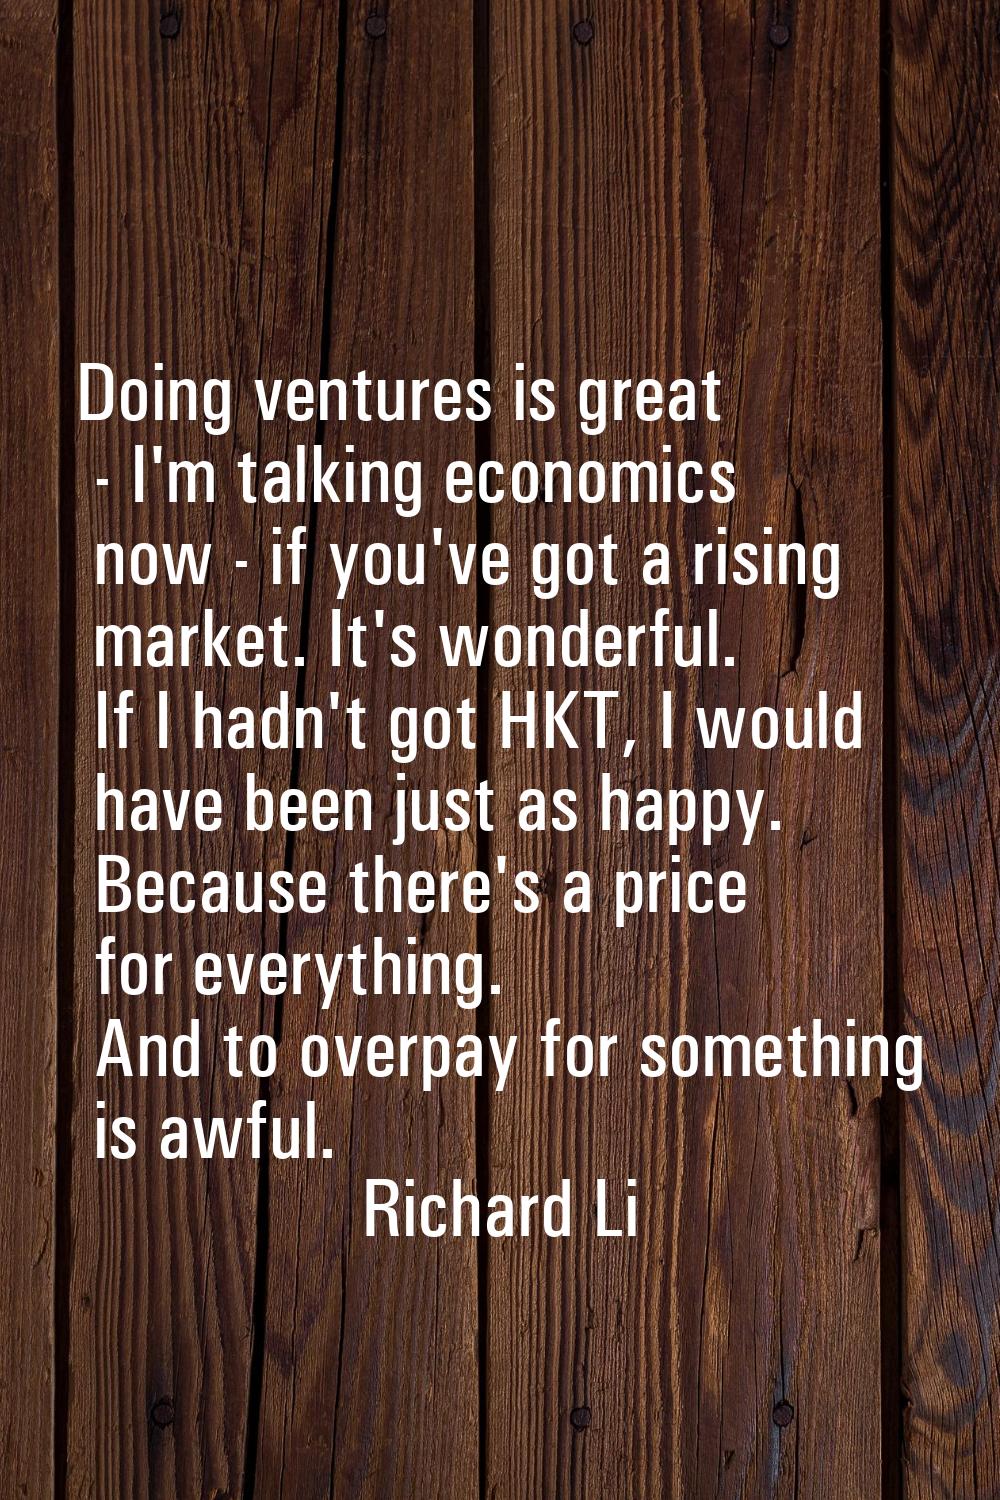 Doing ventures is great - I'm talking economics now - if you've got a rising market. It's wonderful